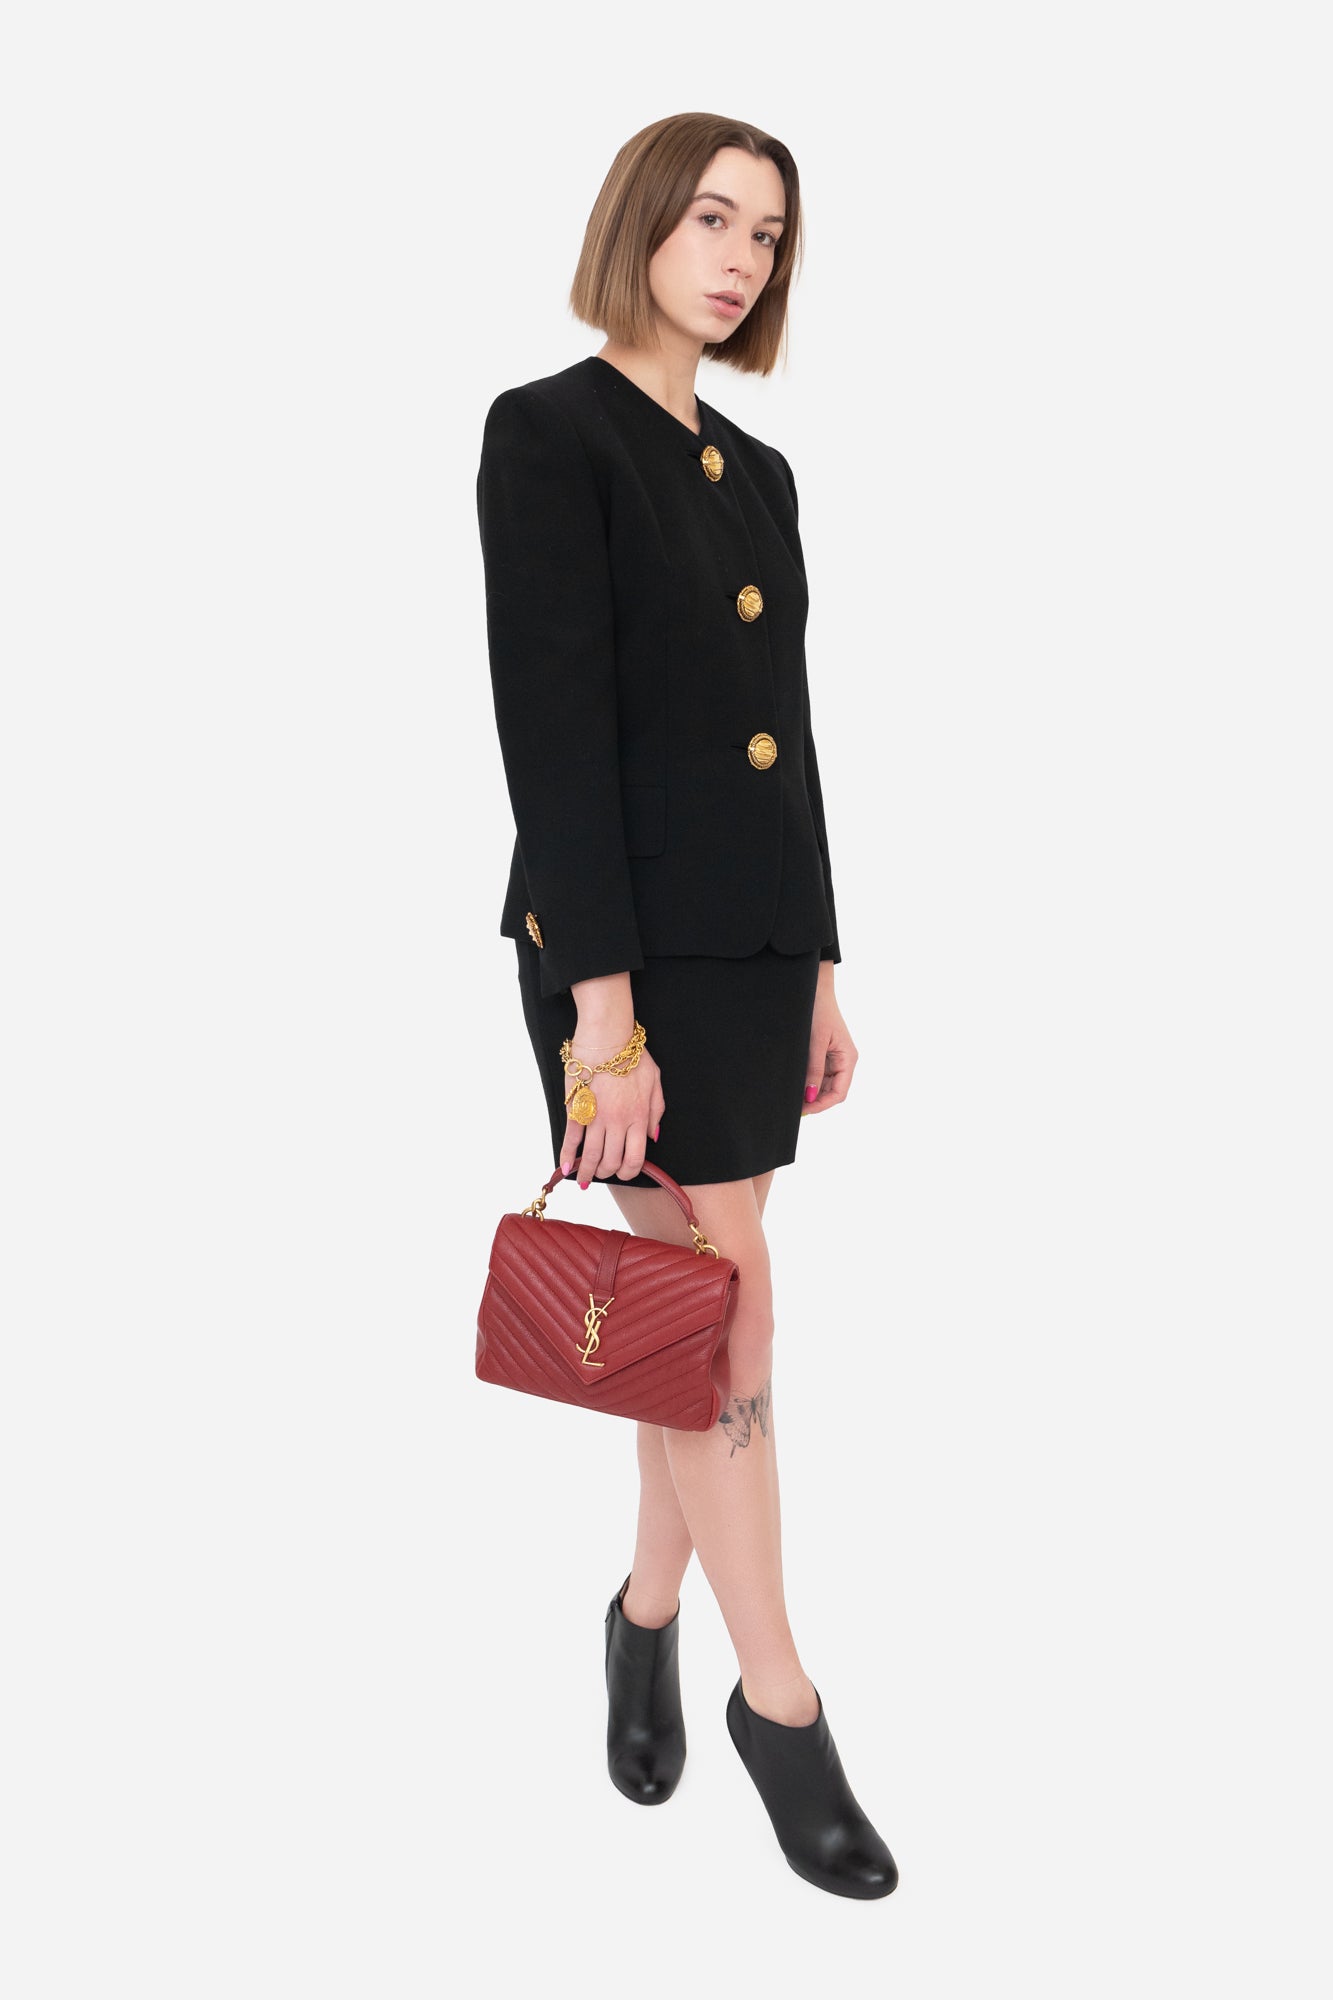 Vintage Black Skirt Suit with Gold Buttons